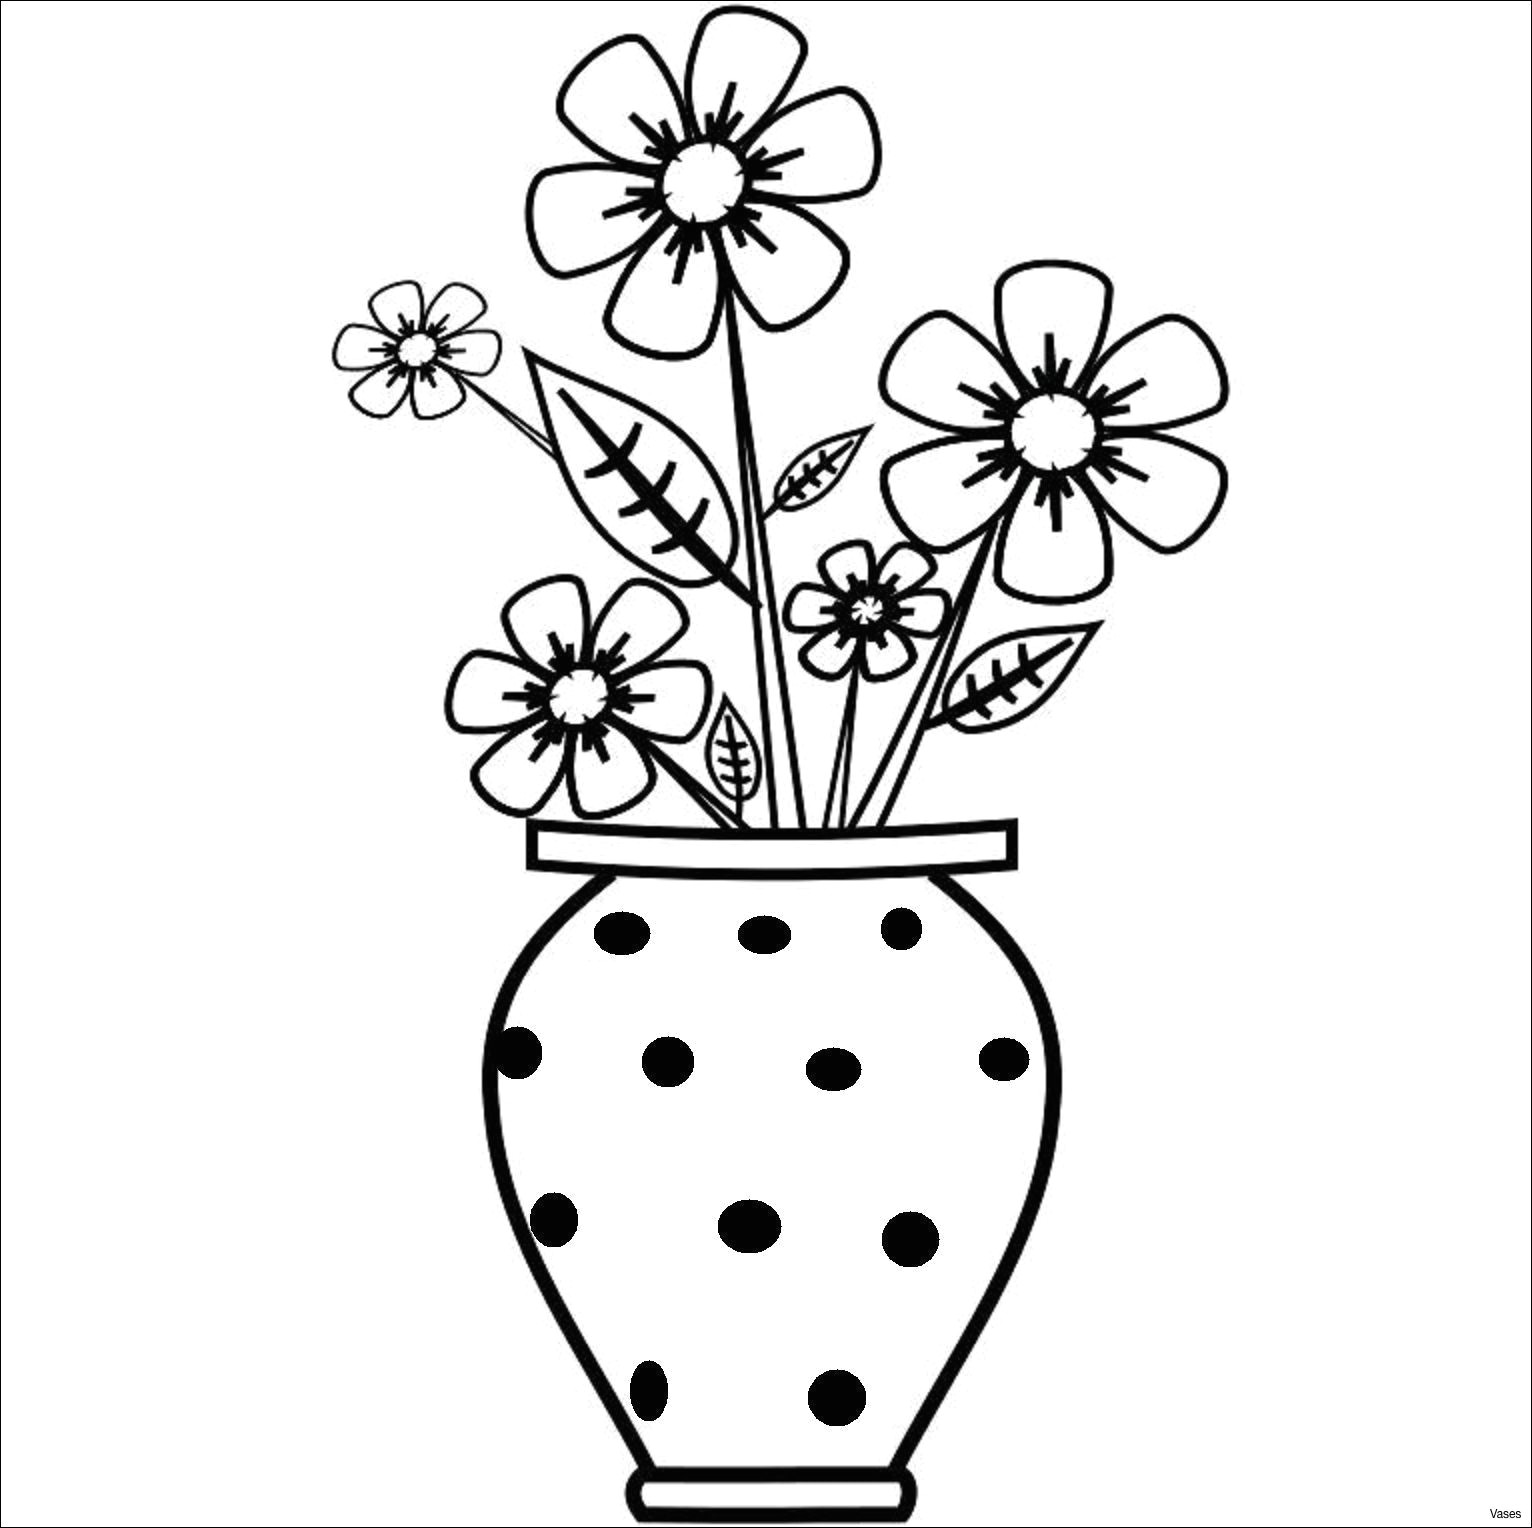 Drawing Of Flowers In Vase Easy Pics Of Drawings Easy Vase Art Drawings How to Draw A Vase Step 2h